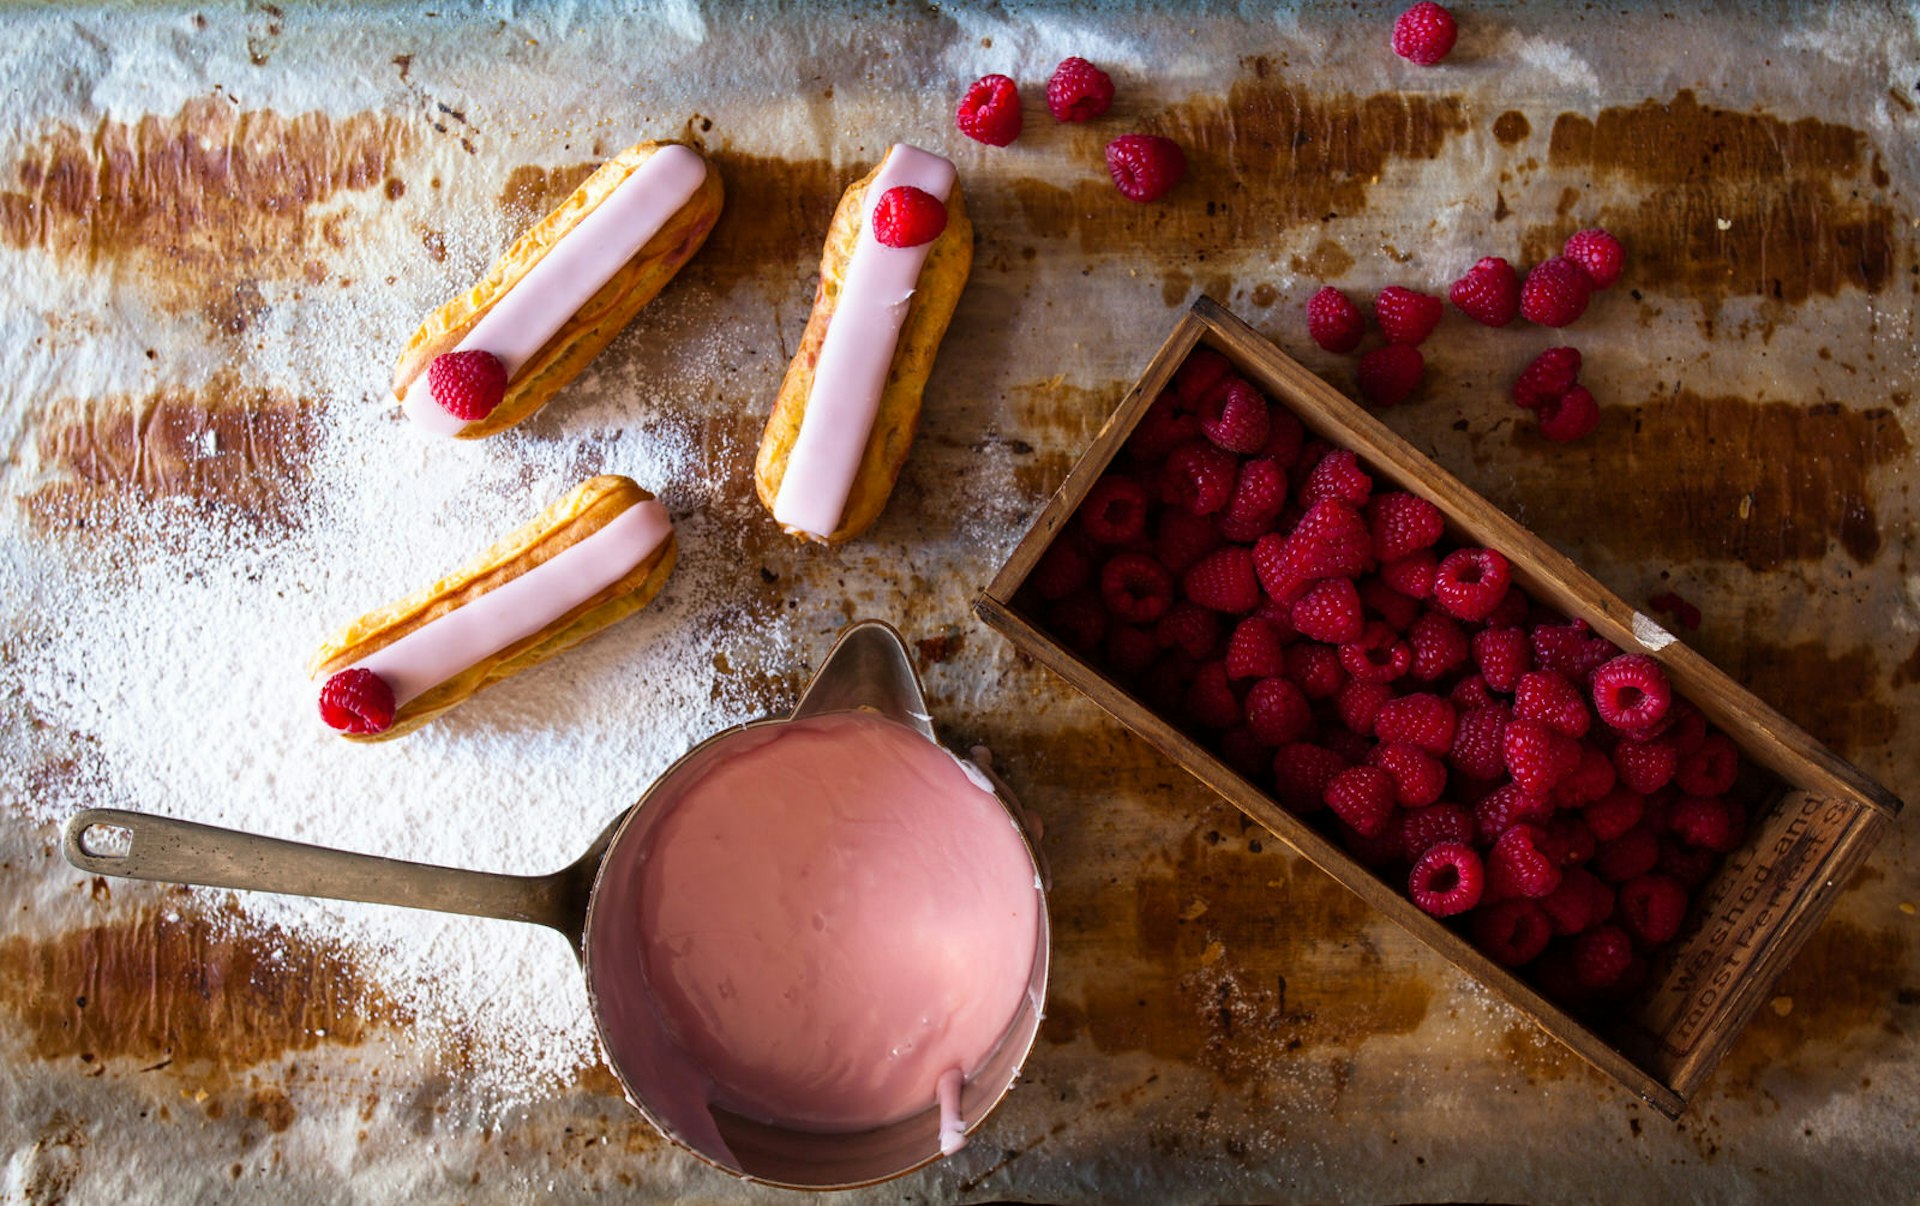 Raspberry eclairs sit next to some pink icing and fresh raspberries on a sugary table